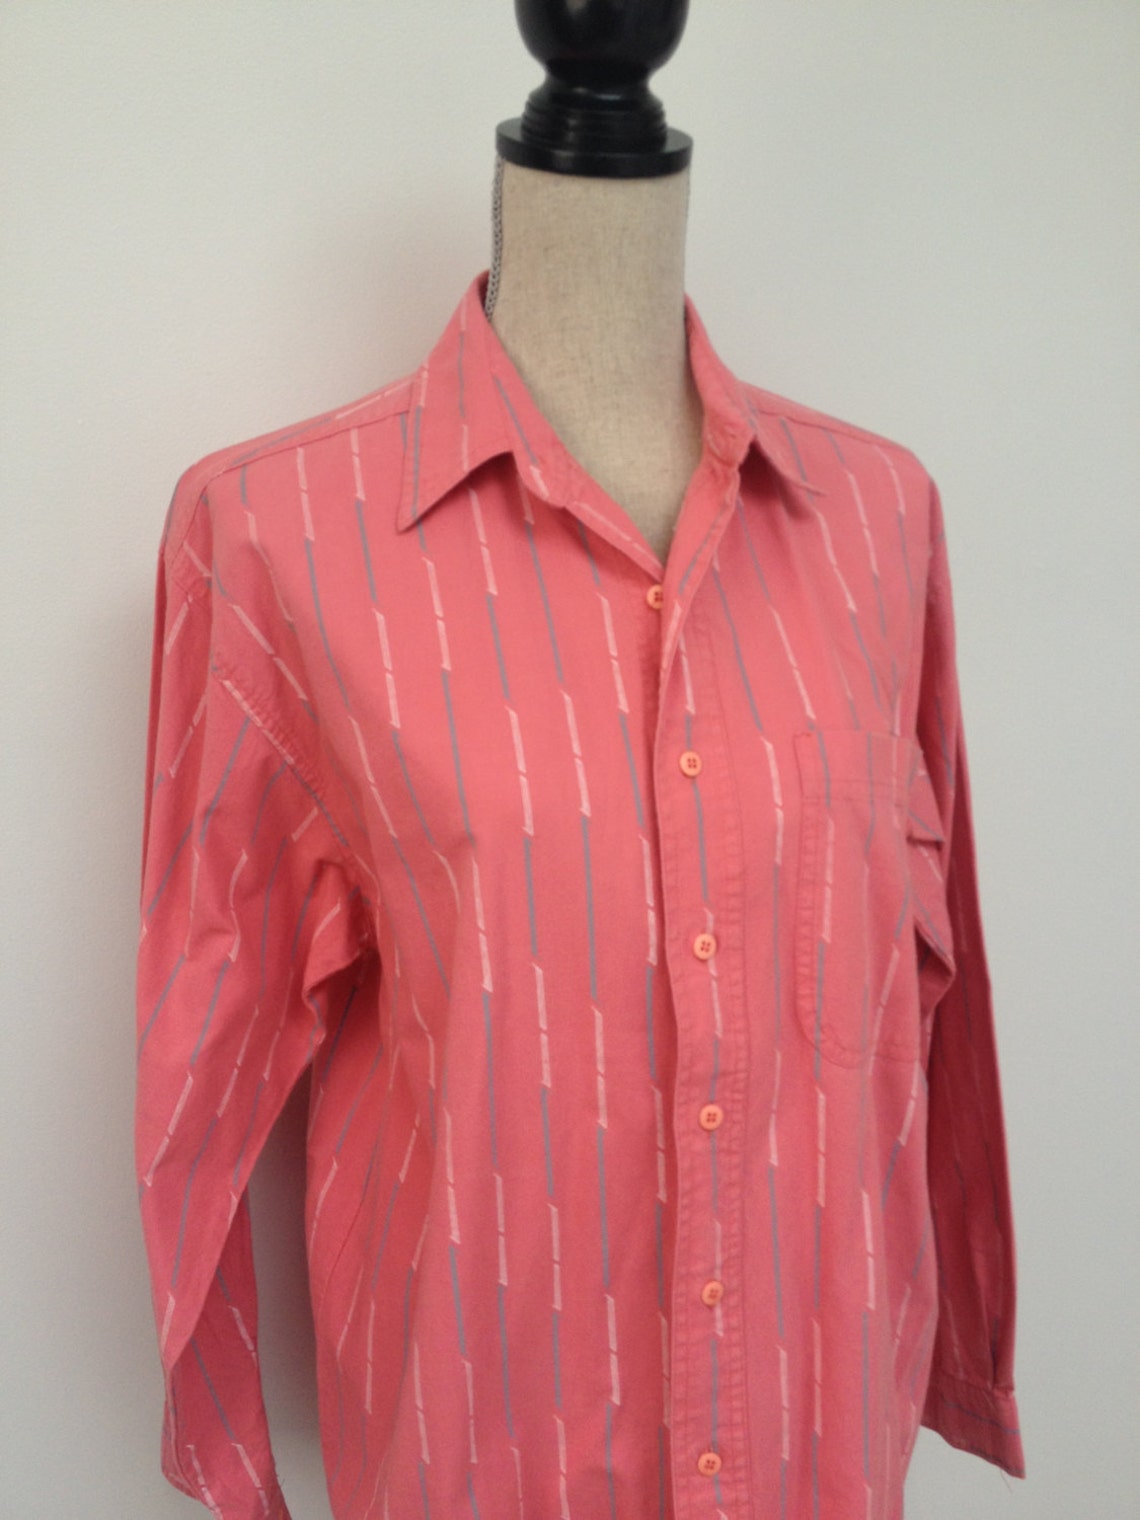 Vintage 80s Coral Button up Collared Striped Shirt - Etsy